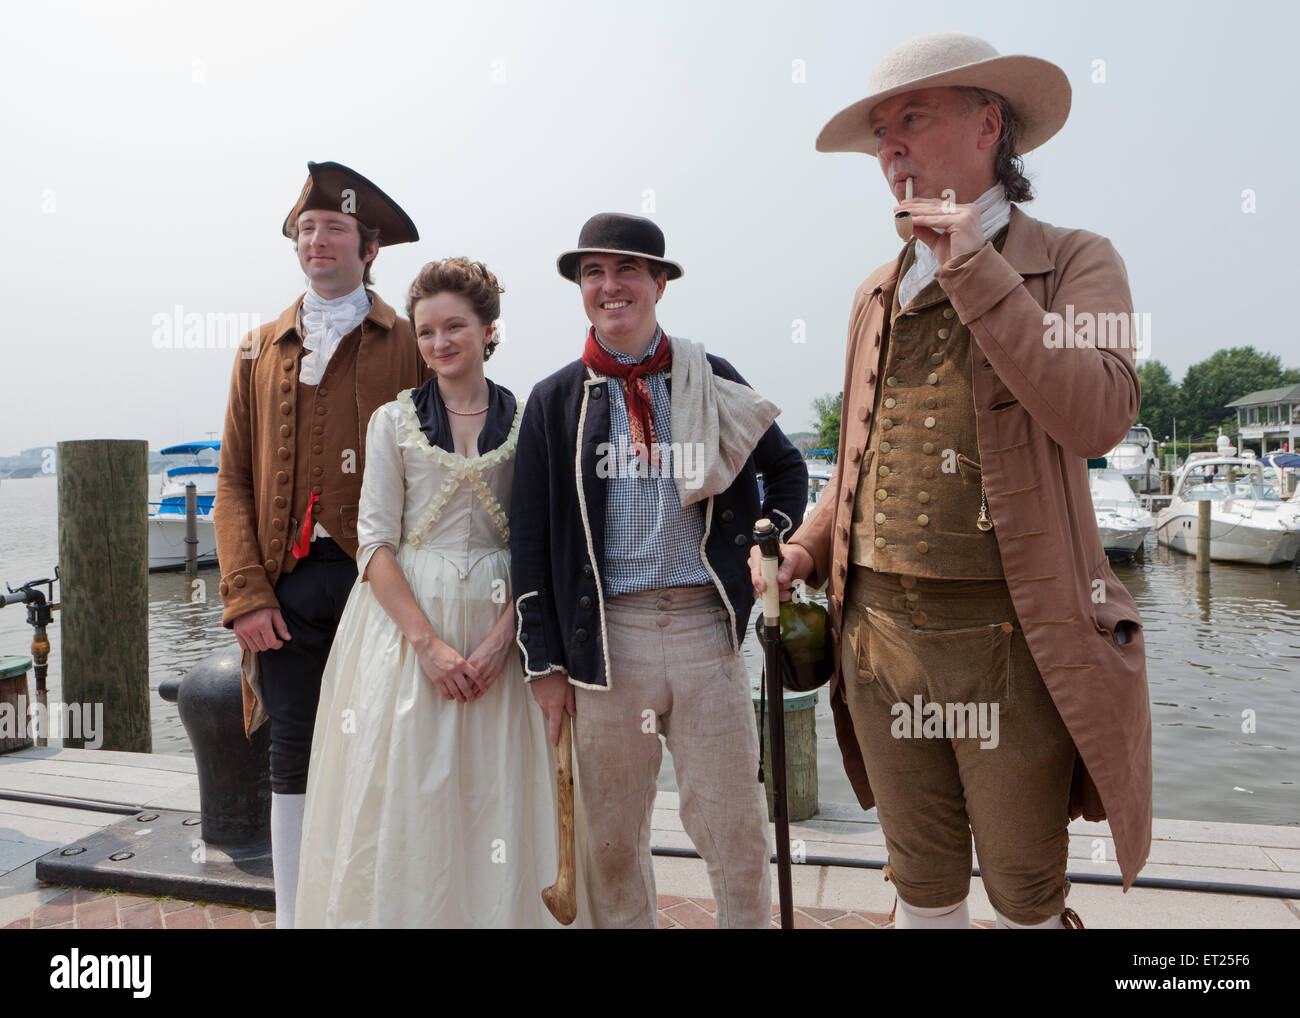 Family dressed in colonial period costume -Alexandria, Virginia USA Stock Photo